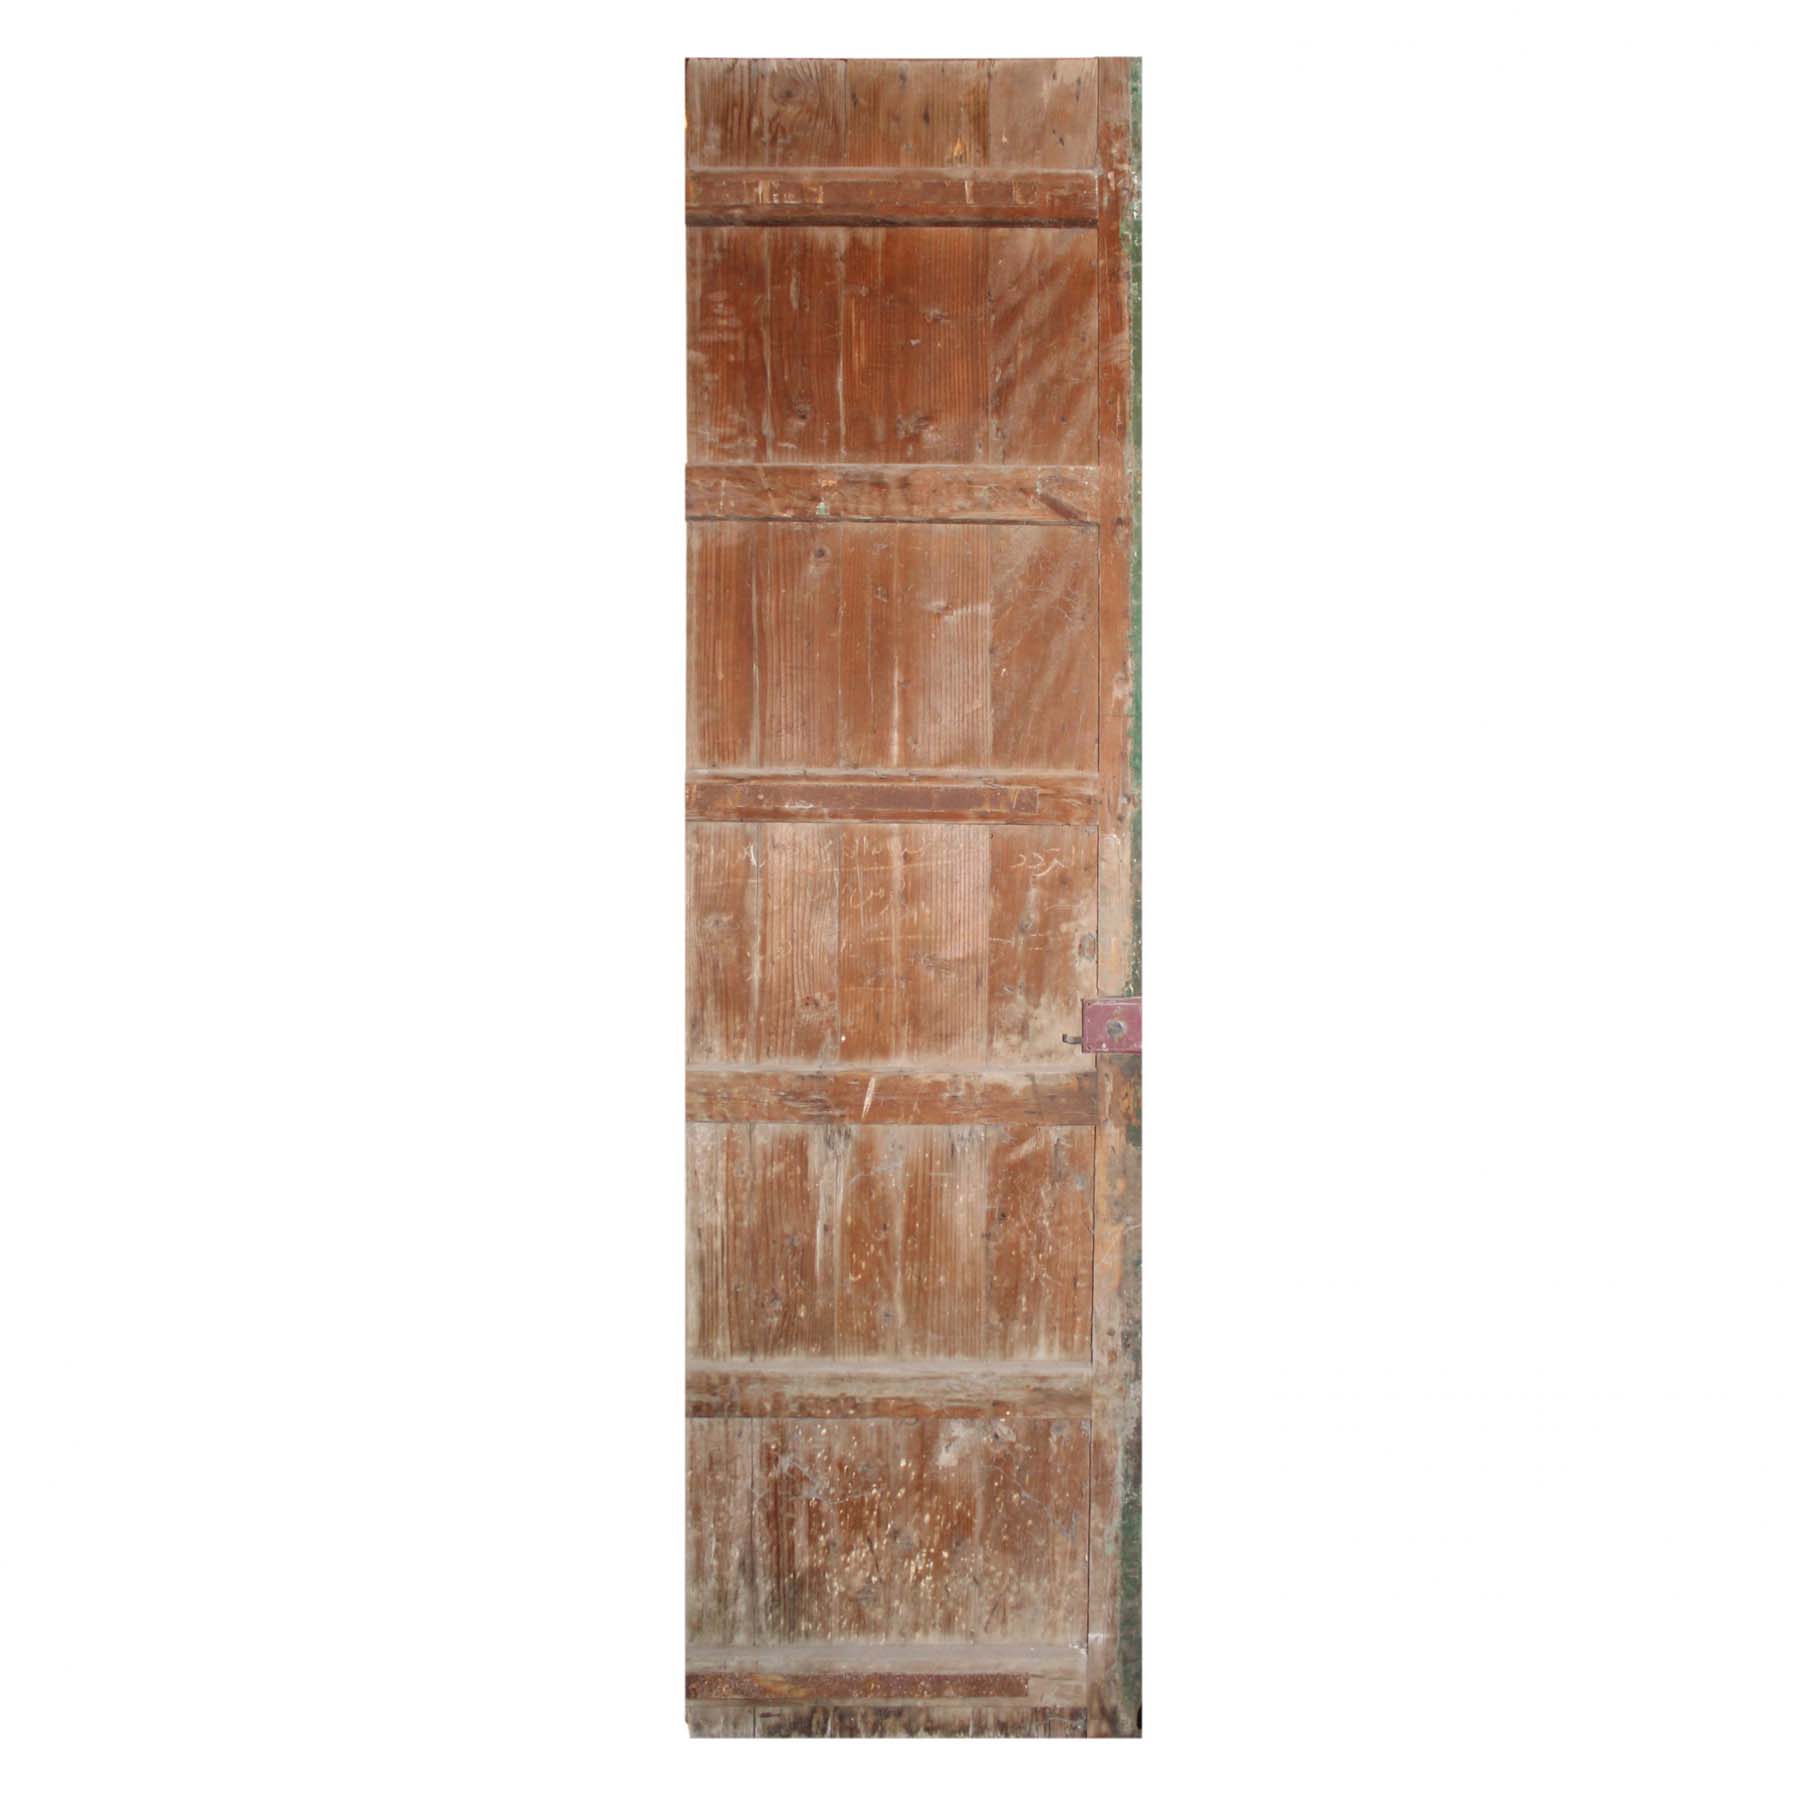 Reclaimed 28” Door with Carved Details-70979